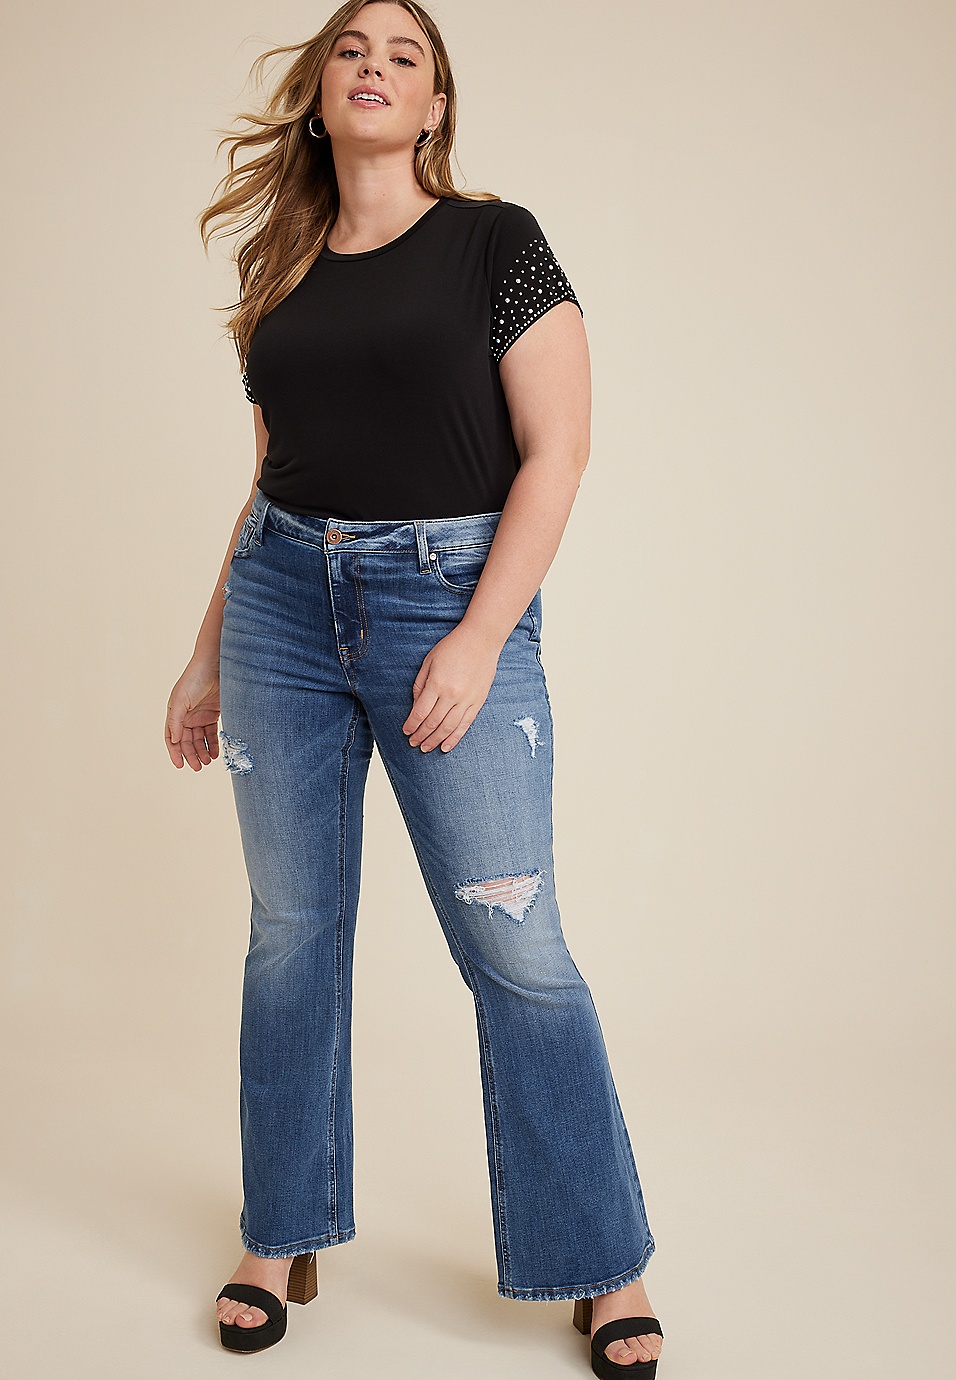 Jeans for Women Bell Bottom Jeans Mid Rise Jeans Plus Size Jeans